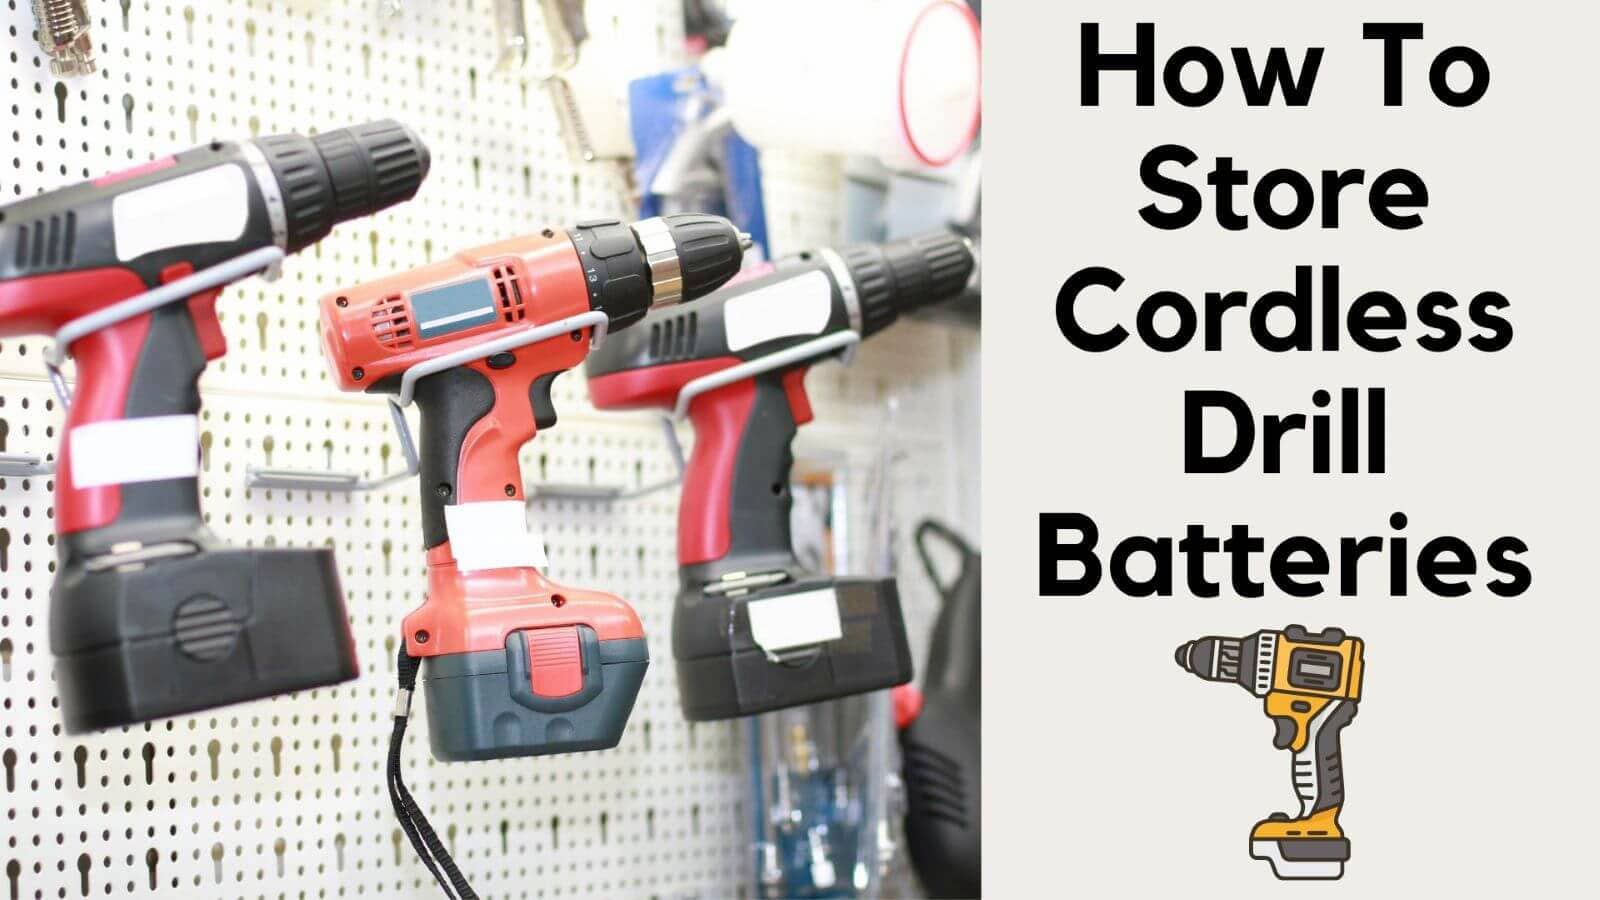 How to Store Cordless Drill Batteries